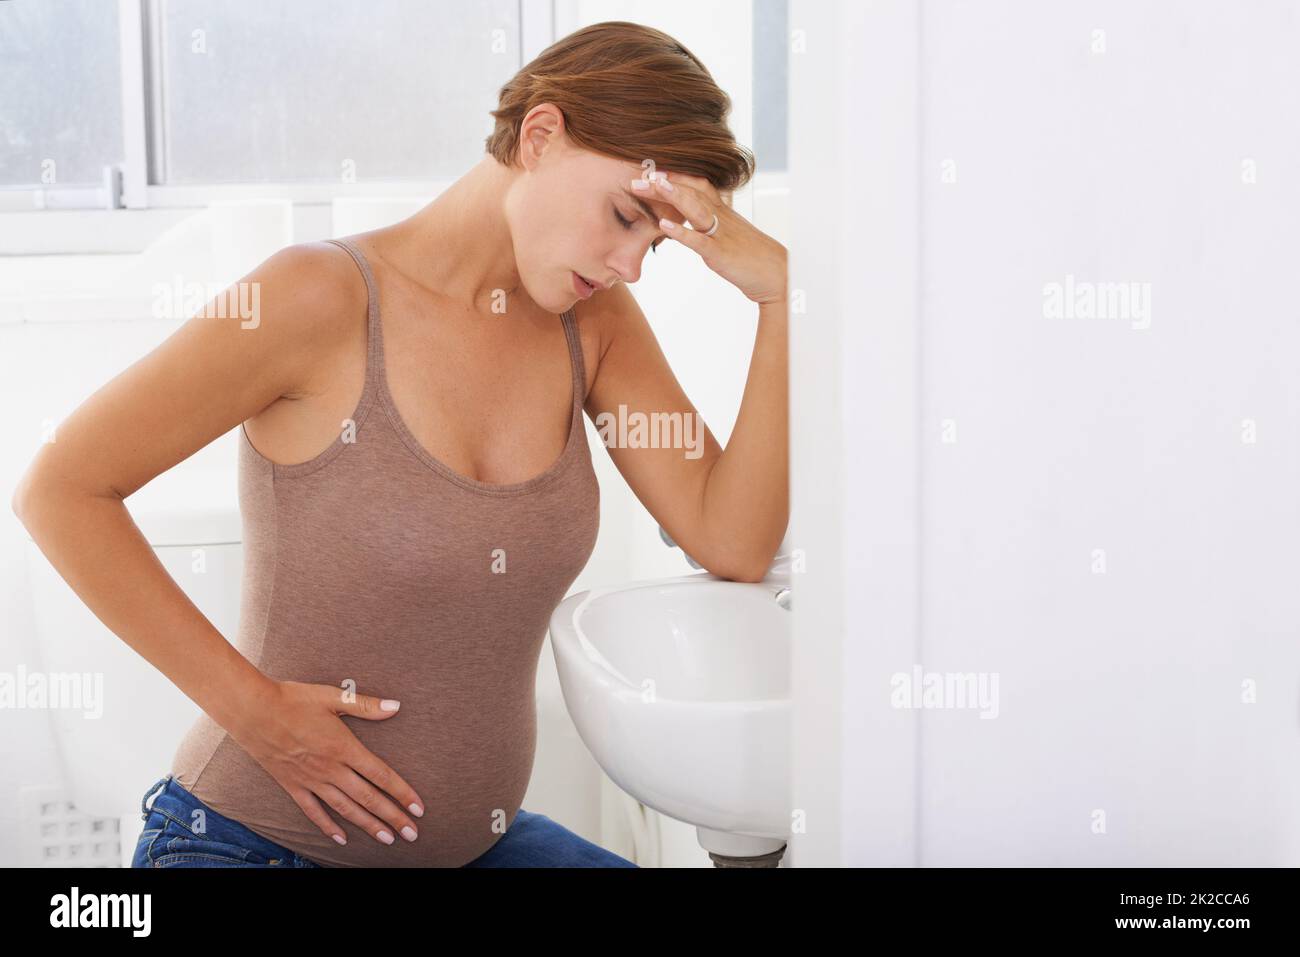 The aches and pains of pregnancy. A pregnant woman struggling with morning sickness in the bathroom. Stock Photo